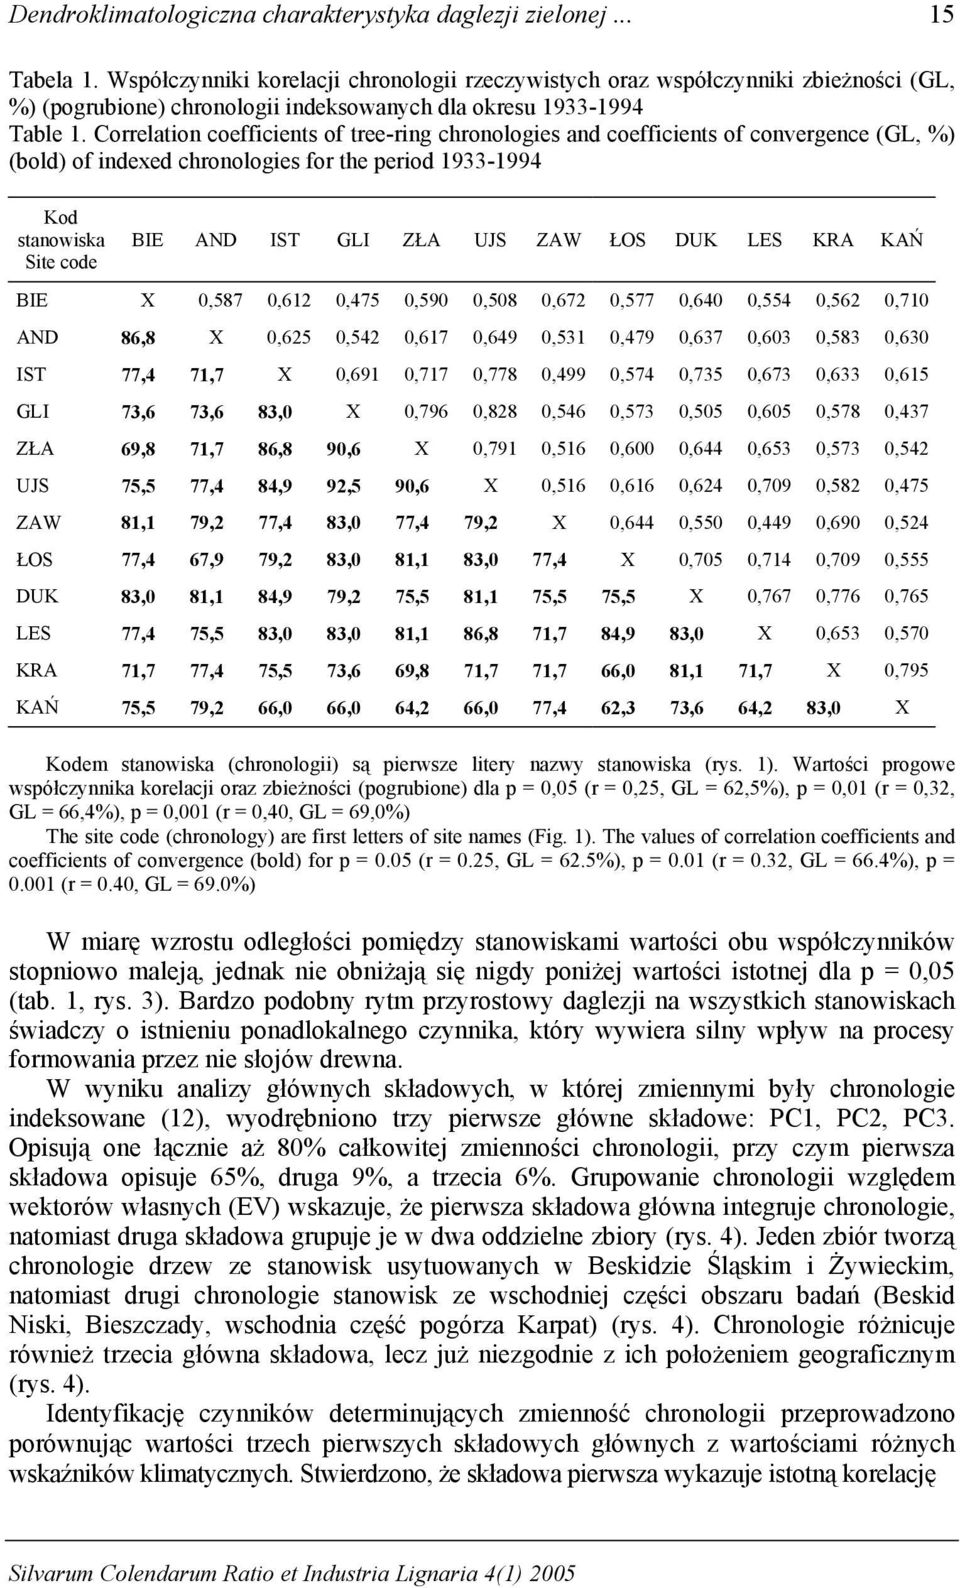 Correlation coefficients of tree-ring chronologies and coefficients of convergence (GL, %) (bold) of indexed chronologies for the period 1933-1994 Kod stanowiska Site code BIE AND IST GLI ZŁA UJS ZAW